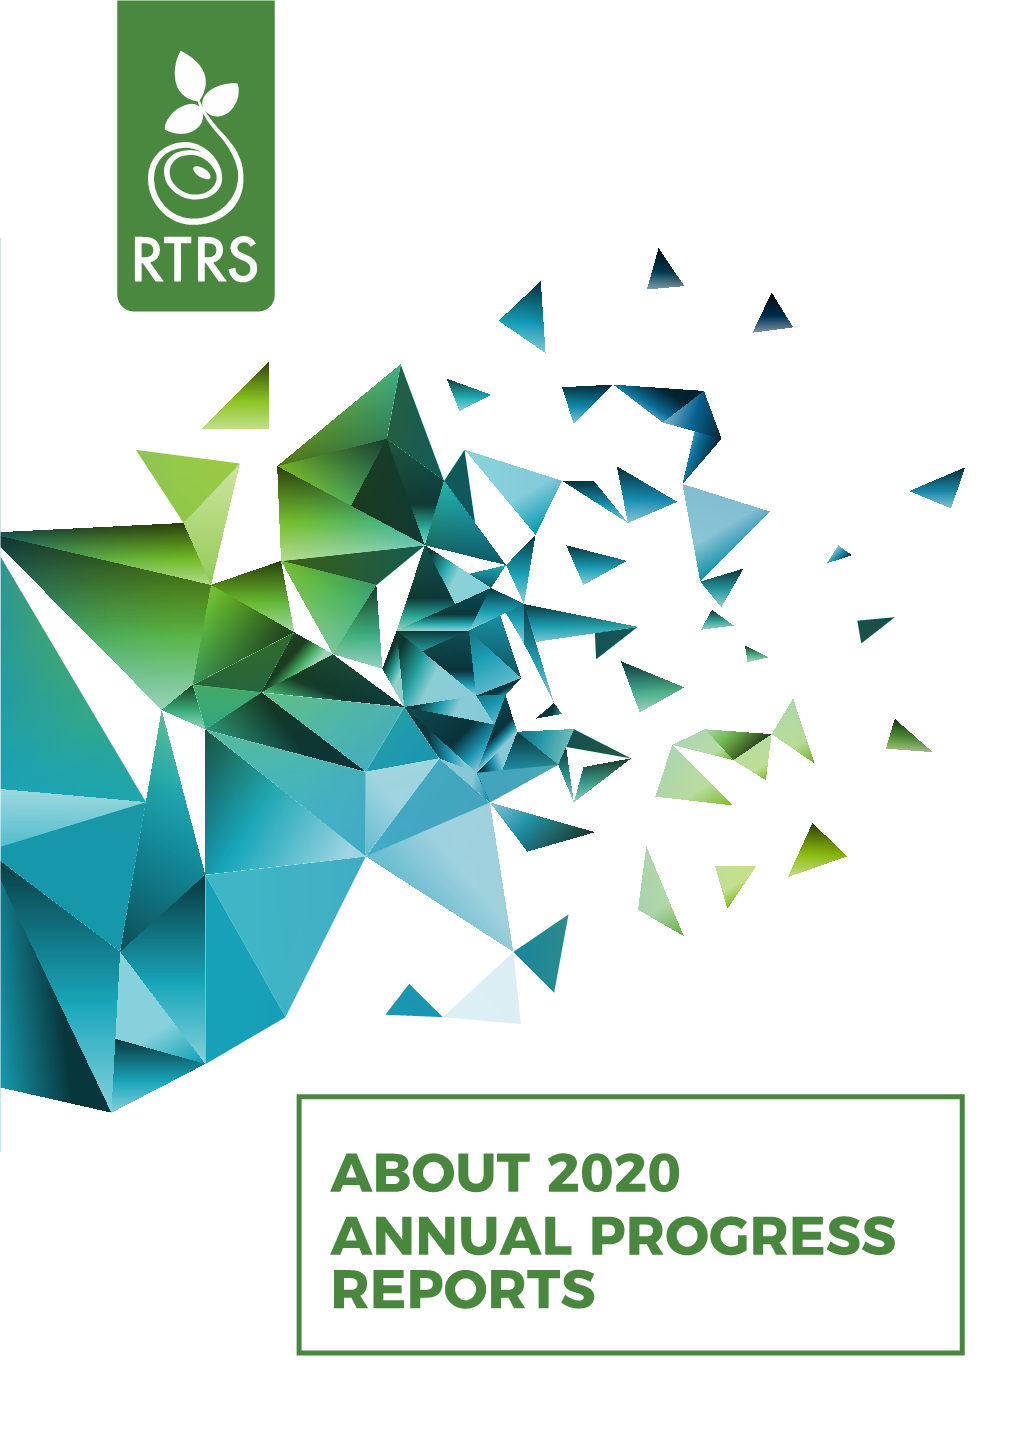 ABOUT 2020 ANNUAL PROGRESS REPORTS APR 2020 Submission by 75% Participant Members (104)